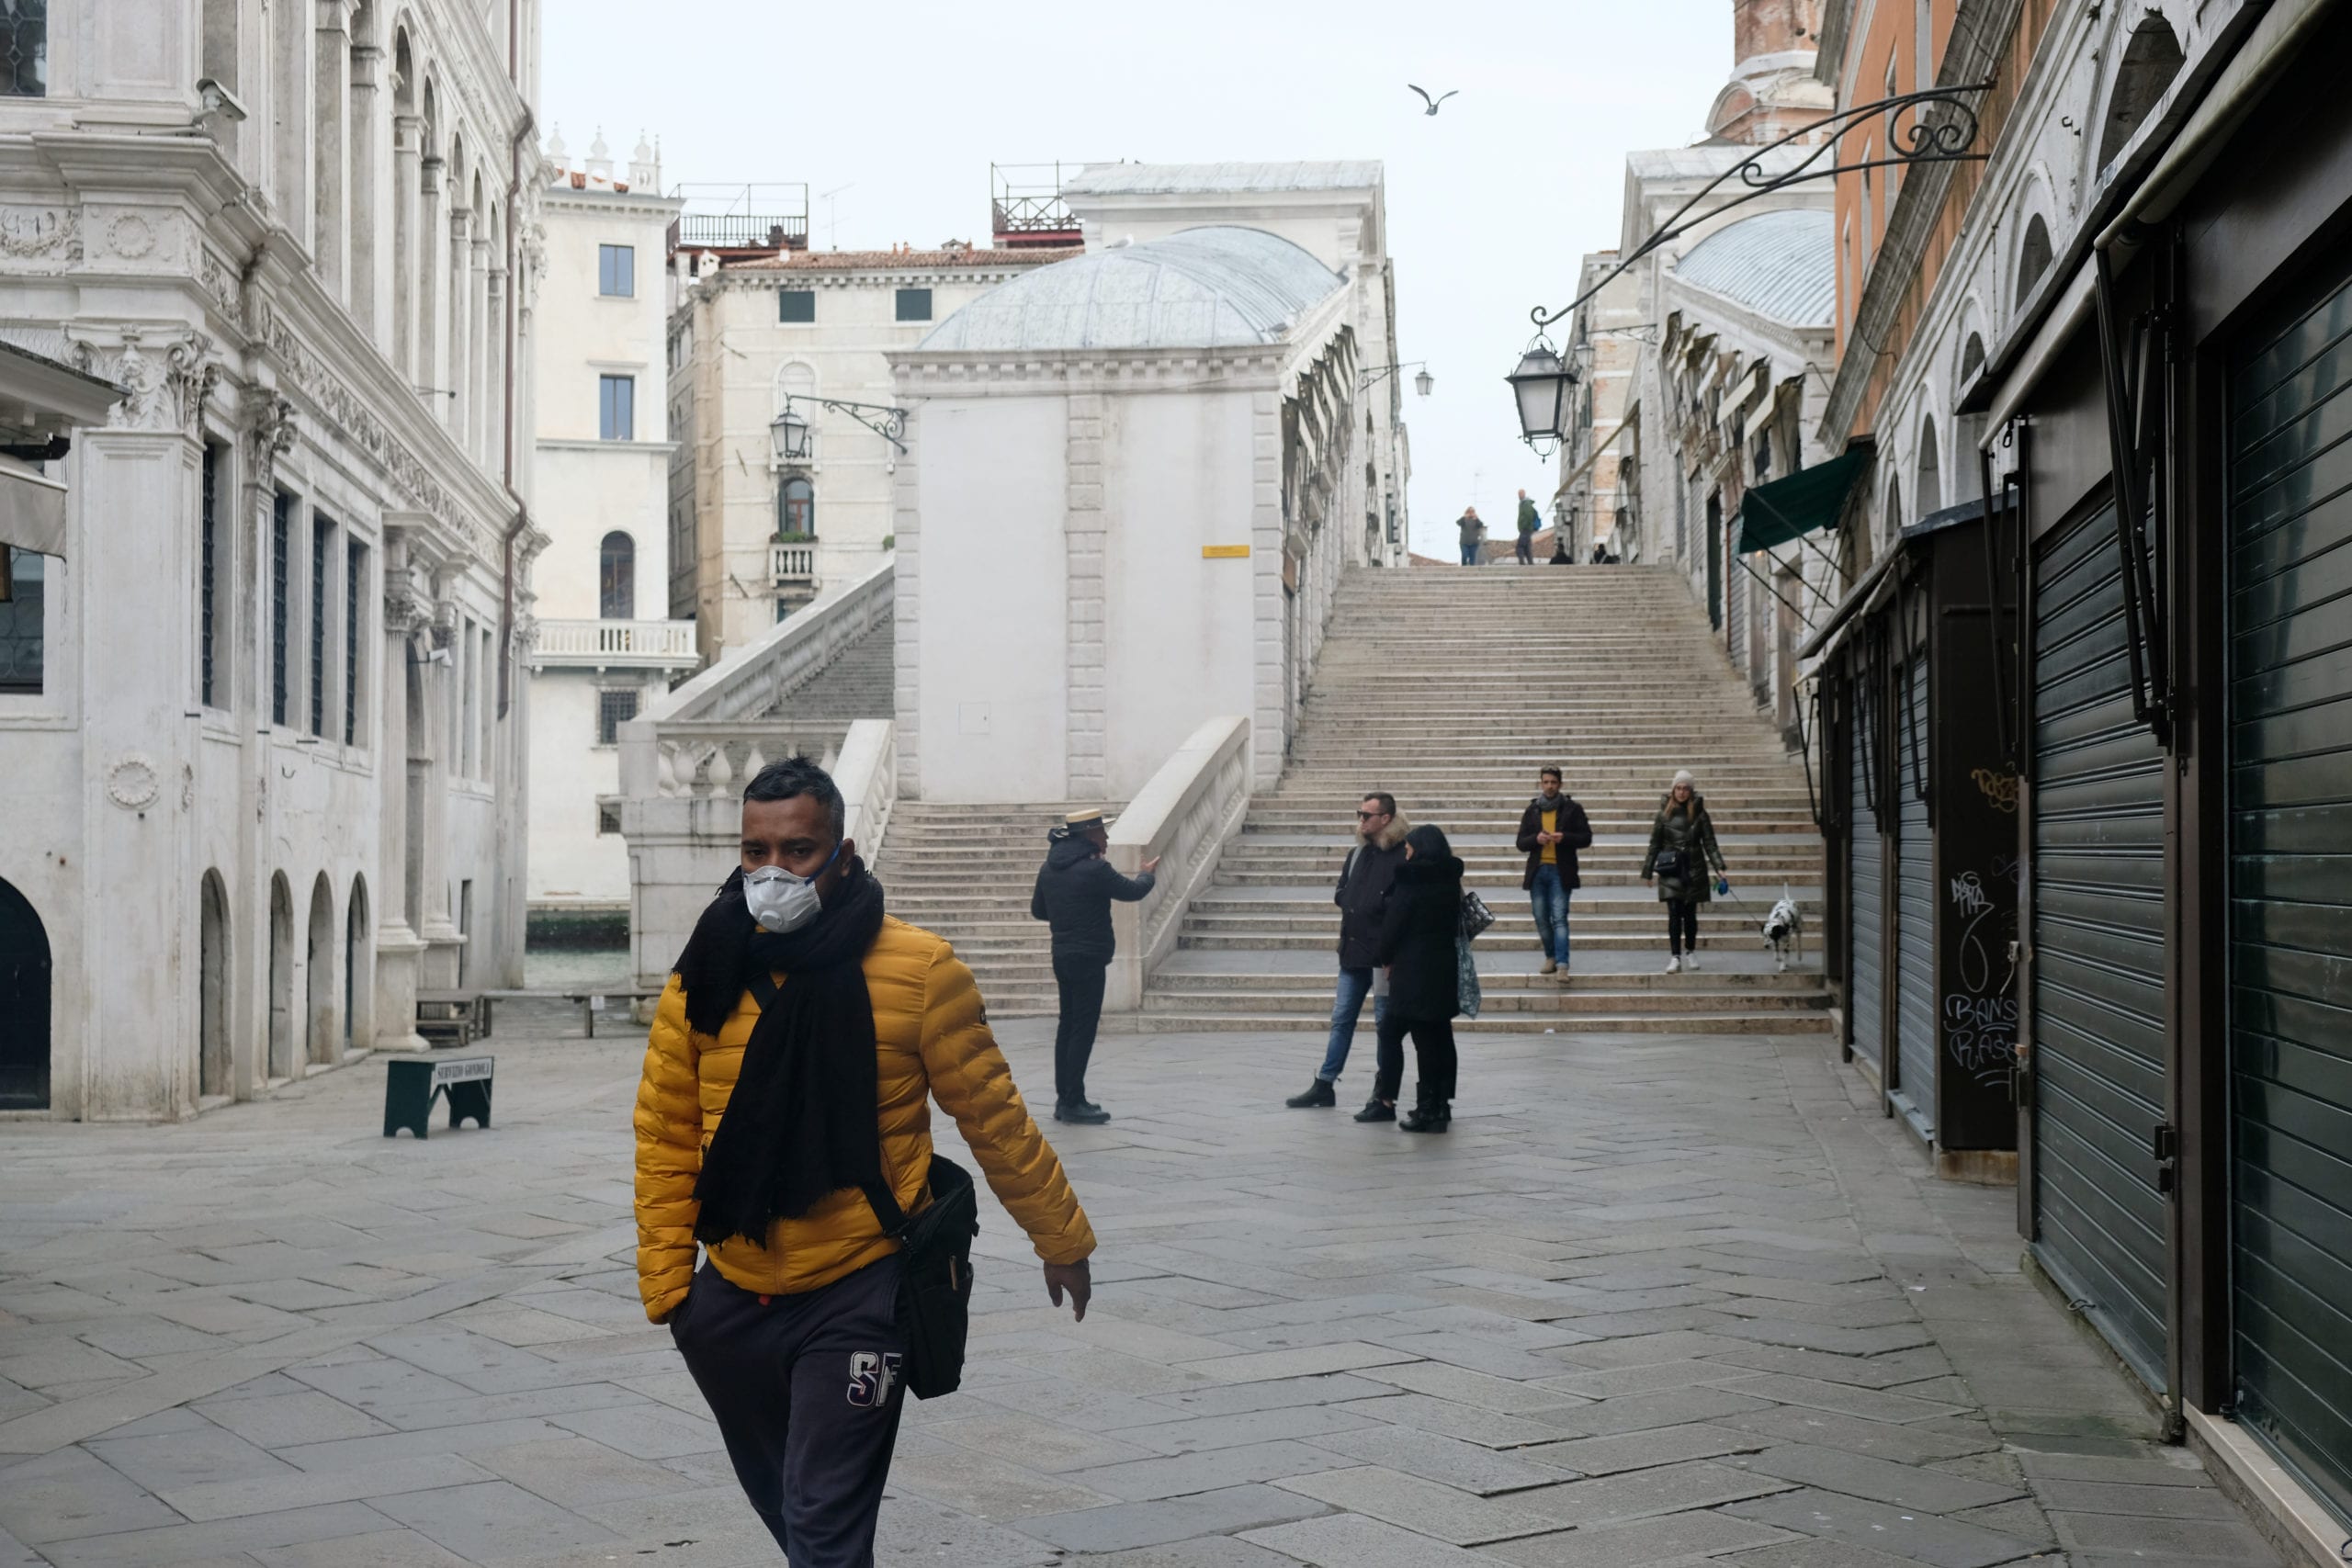 A man wearing a protective face mask walks through a street after the Italian government imposed a virtual lockdown on the north of Italy including Venice to try to contain a coronavirus outbreak, in Venice, Italy, March 9, 2020. REUTERS/Manuel Silvestri